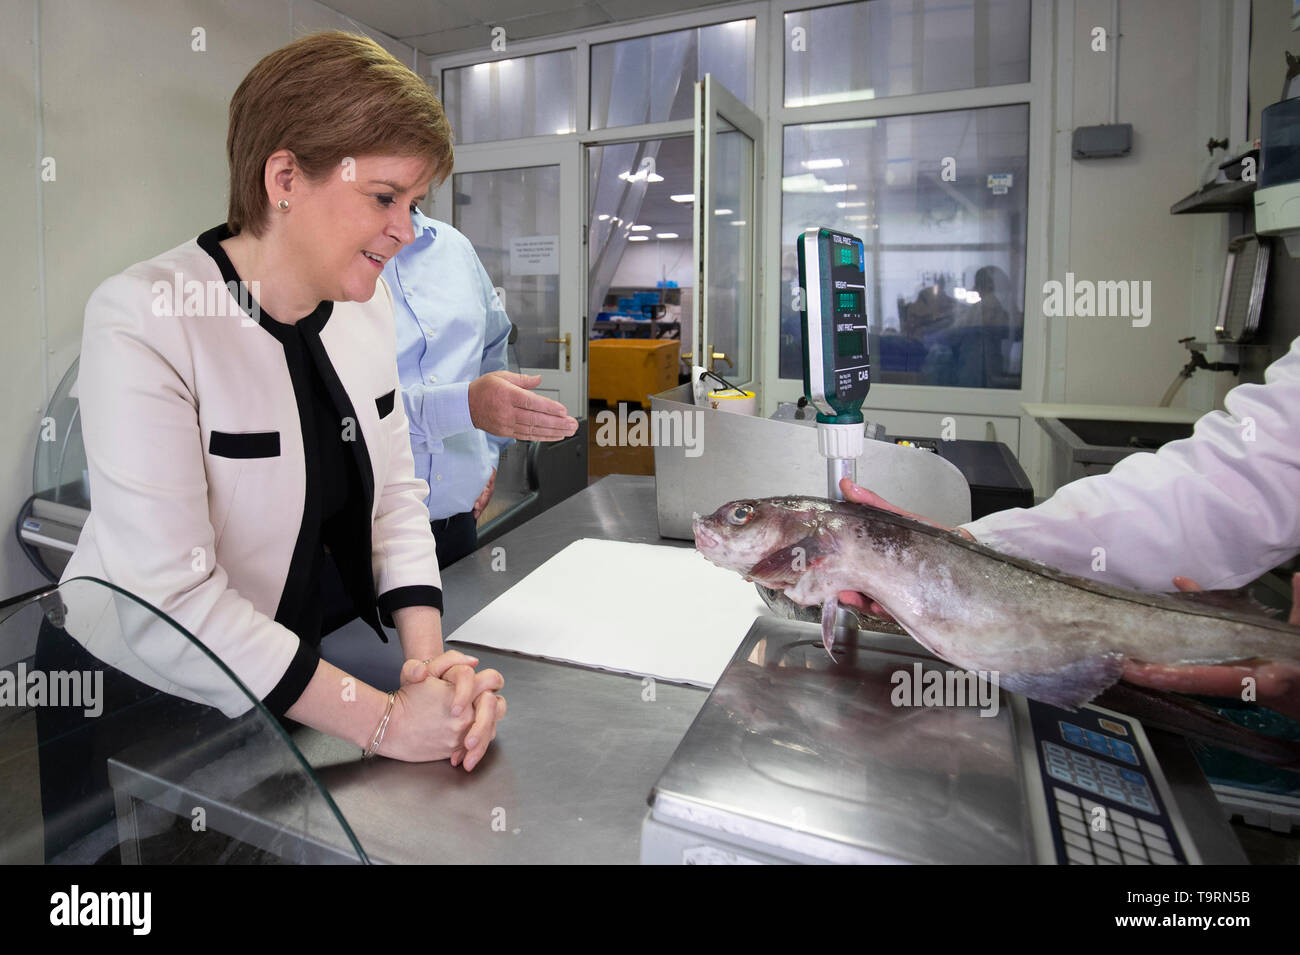 First Minister Nicola Sturgeon during a visit with SNP European election candidate Christian Allard to J Charles Ltd seafood processing plant in Aberdeen. Christian Allard worked at J Charles Ltd for 25 years exporting seafood to the continent, before he entered politics. Stock Photo